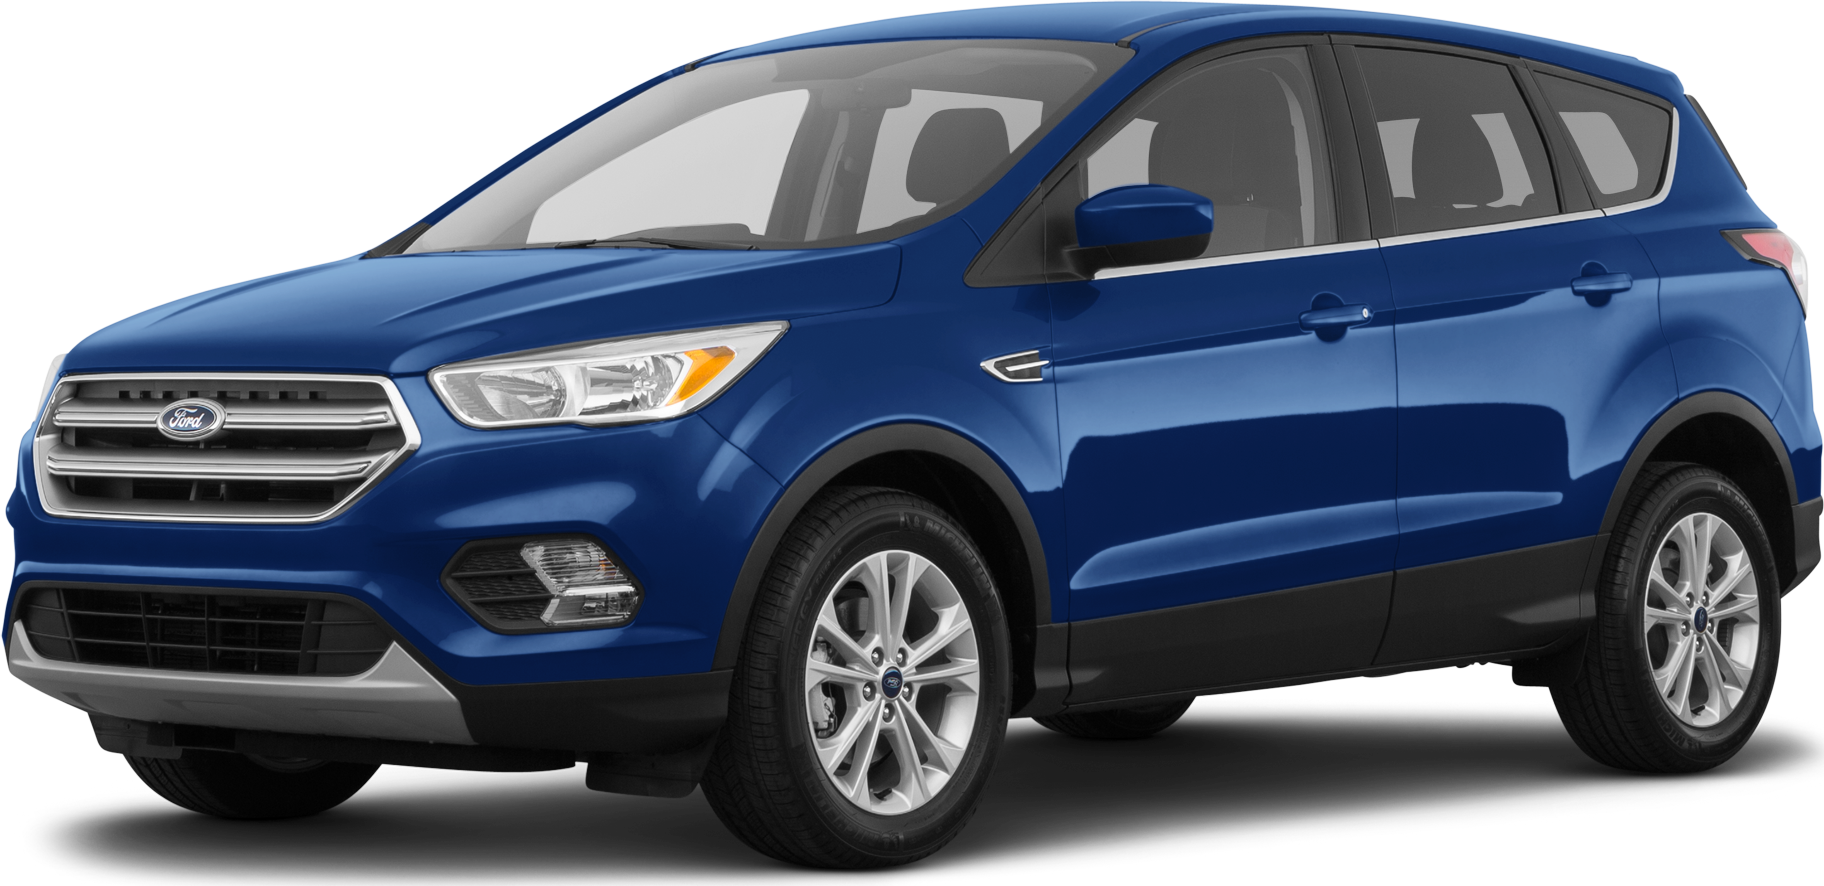 2017 Ford Escape Value Ratings